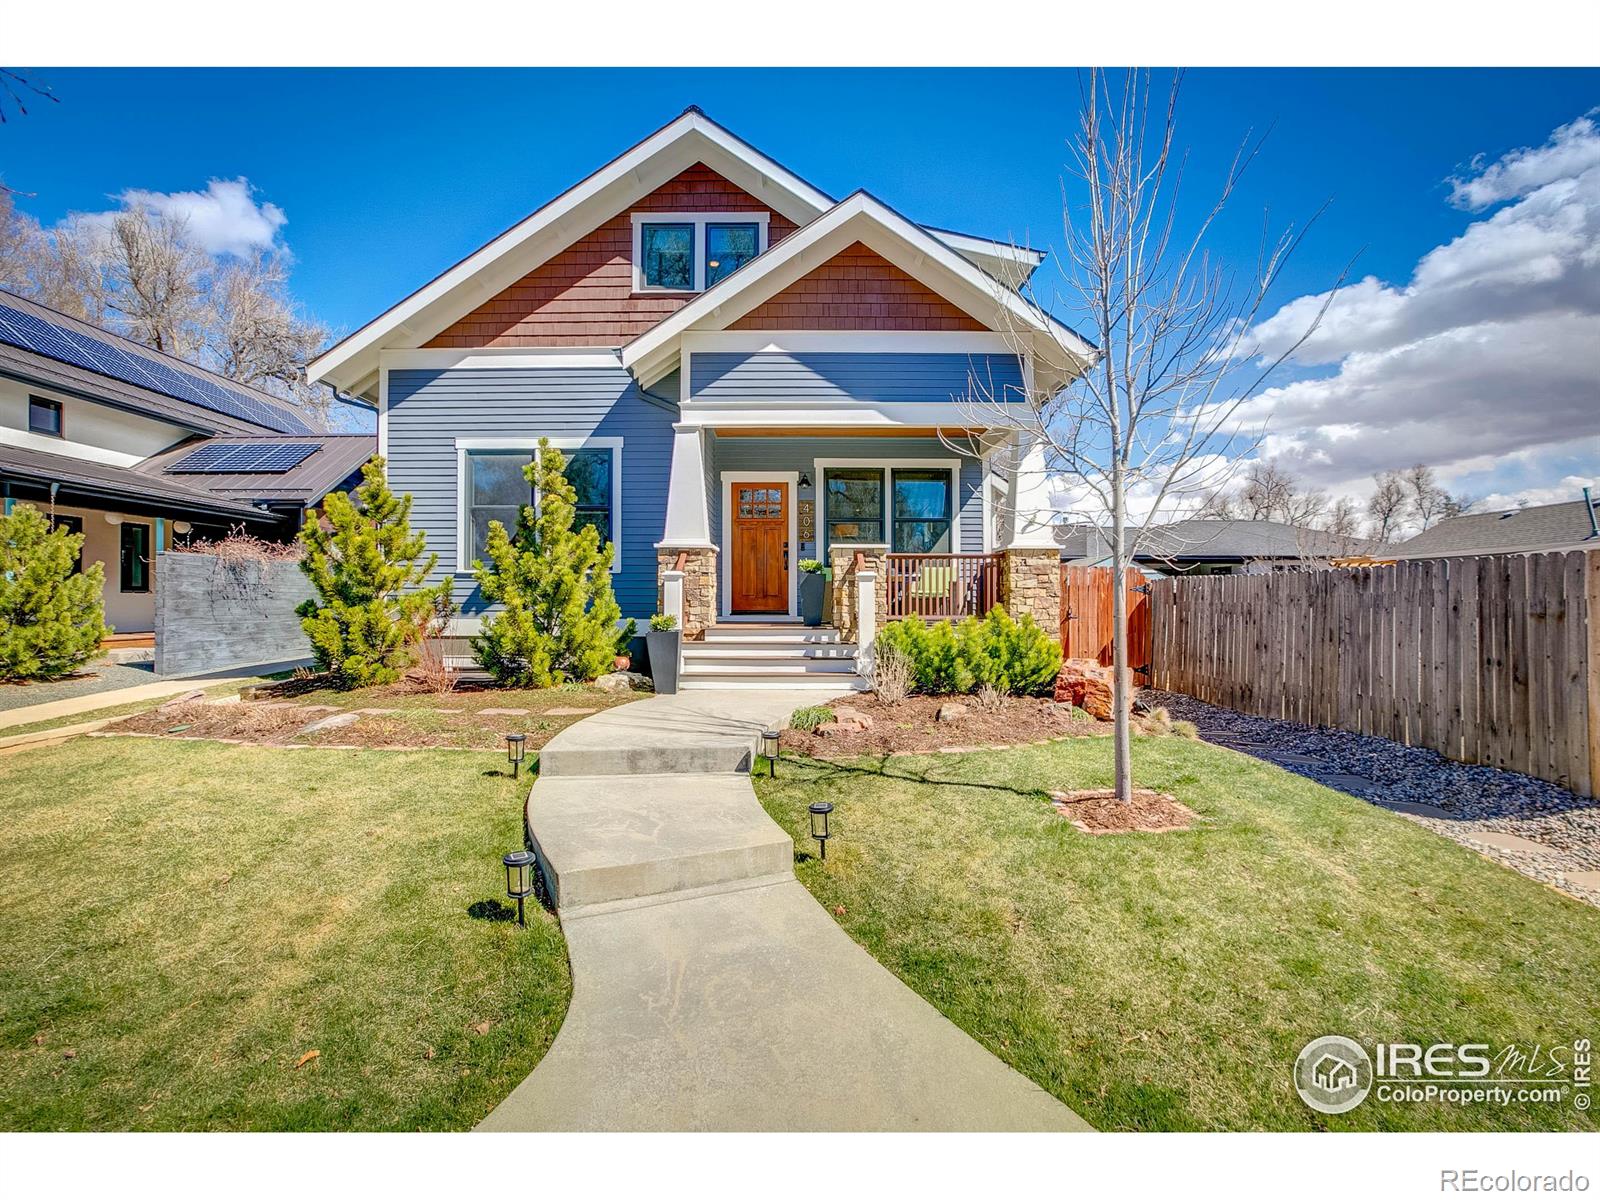 406 N Whitcomb Street, fort collins MLS: 4567891005885 Beds: 6 Baths: 4 Price: $1,500,000